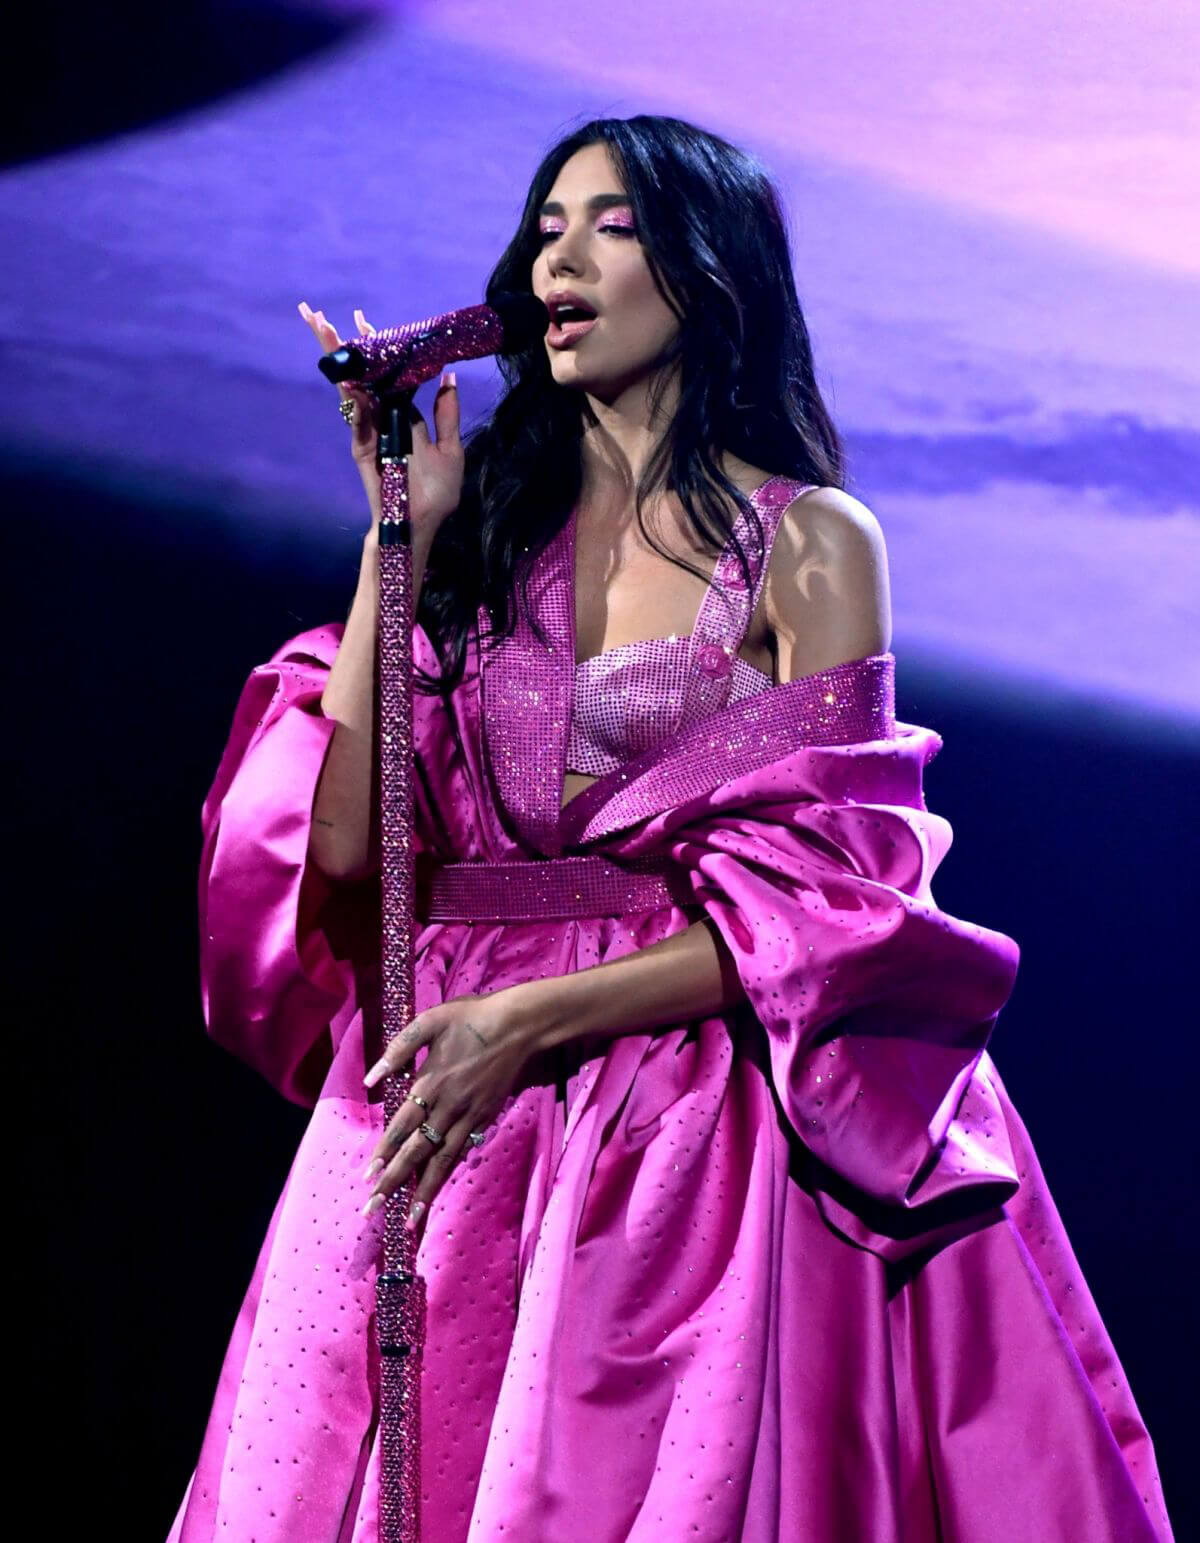 Dua Lipa Performs at 2021 Grammy Awards in Los Angeles 03/14/2021